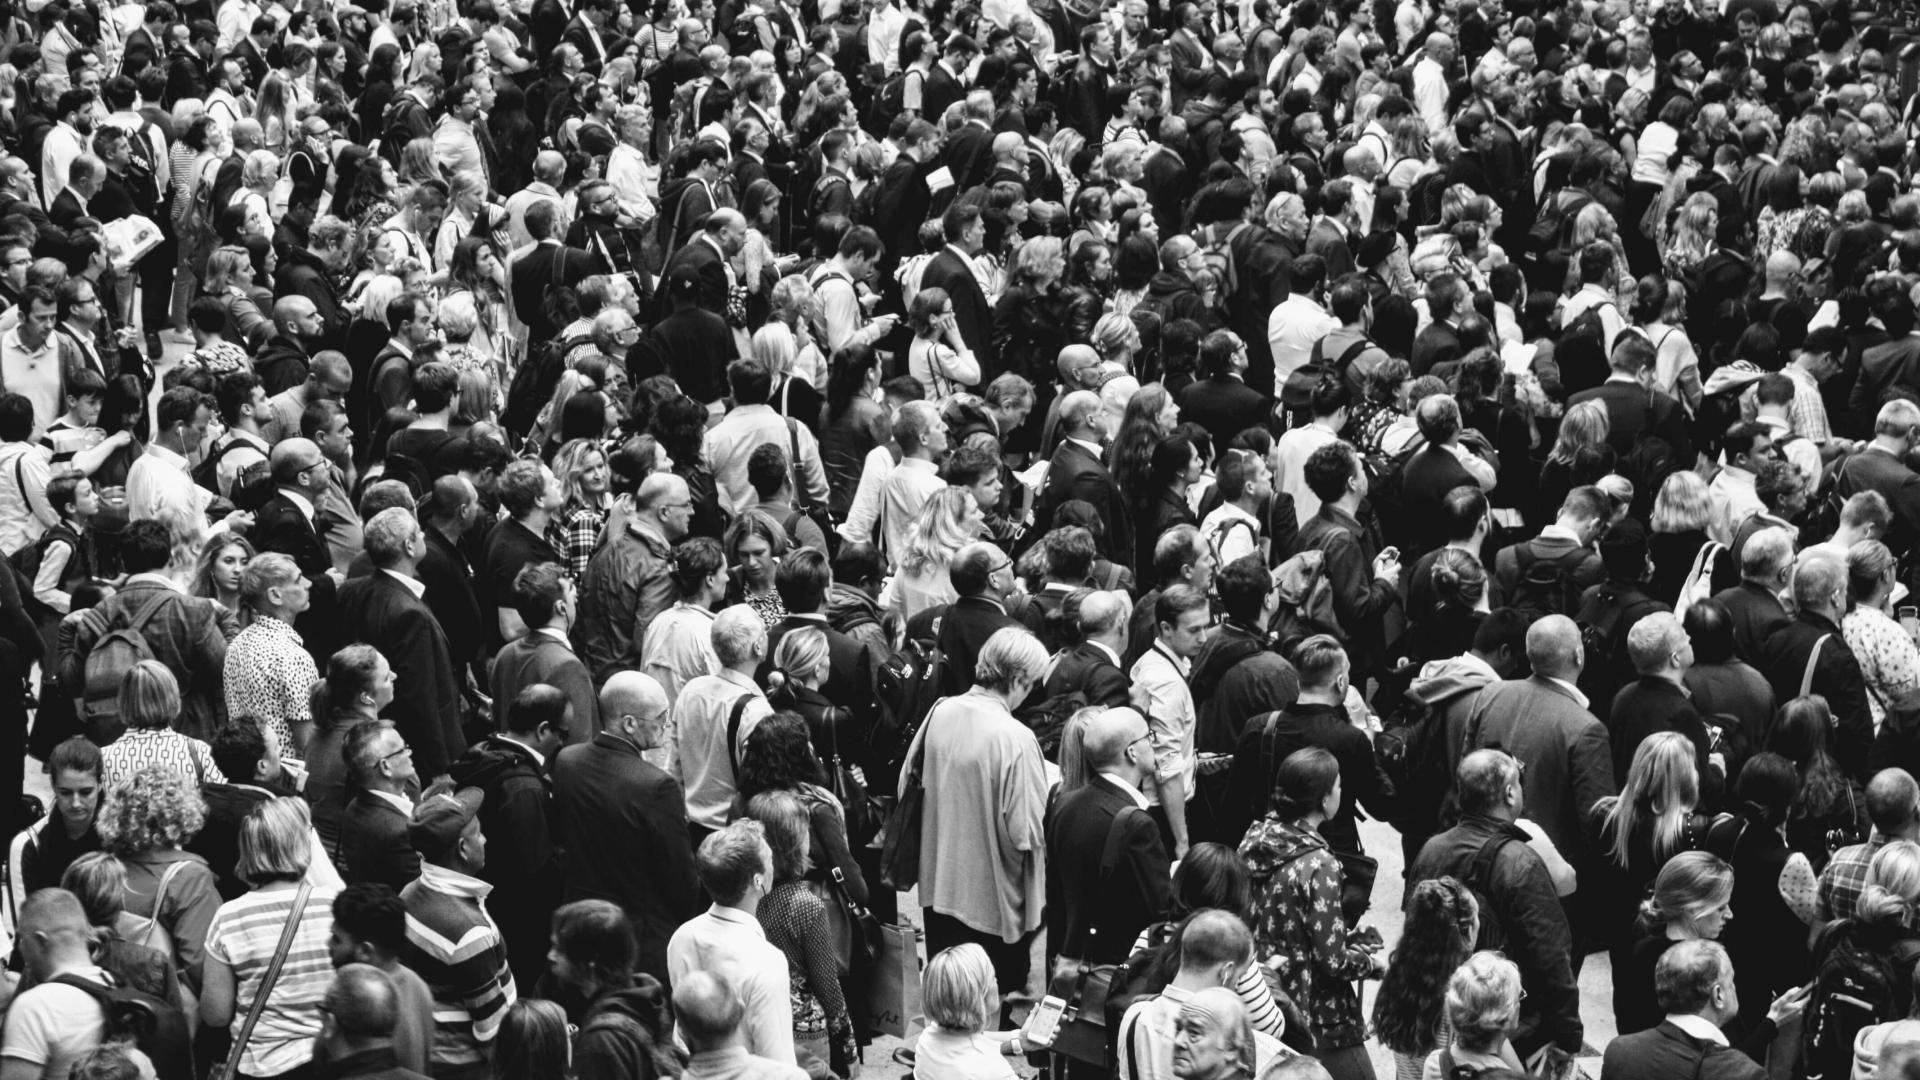 a black and white image of a dense crowd of people